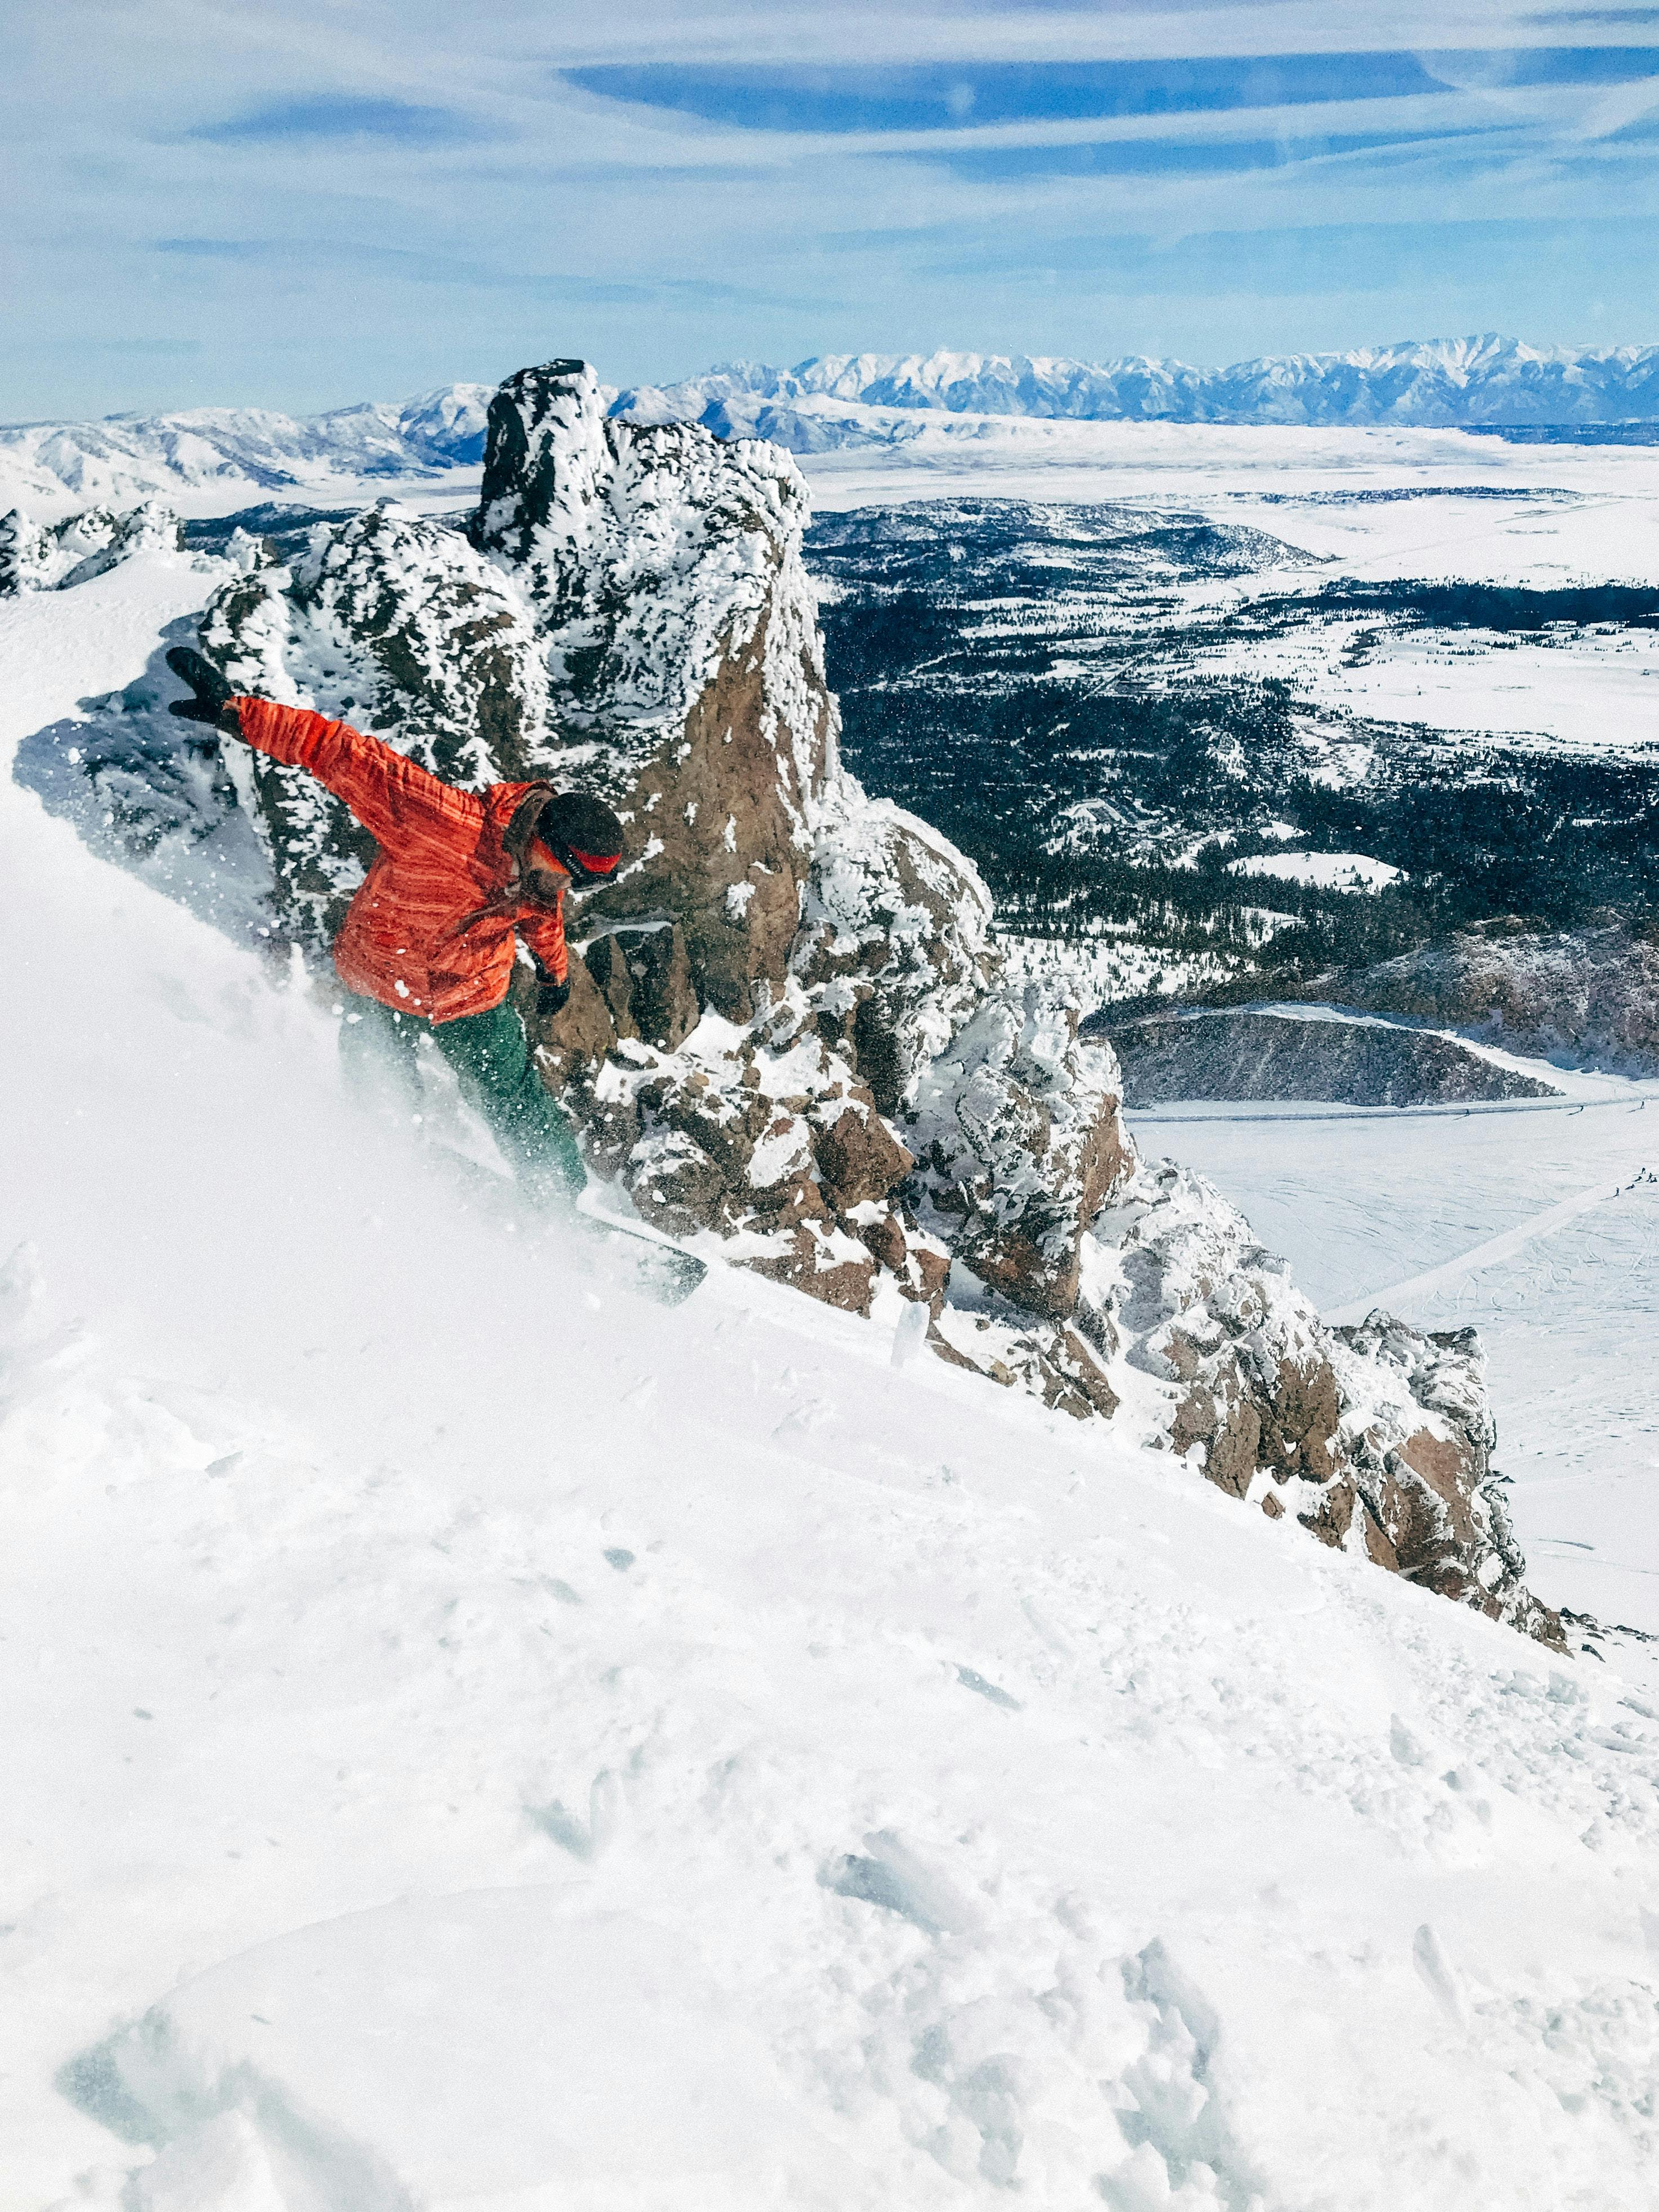 A snowboarder in an orange jacket makes their way down a steep slope with rocks and mountains in the background